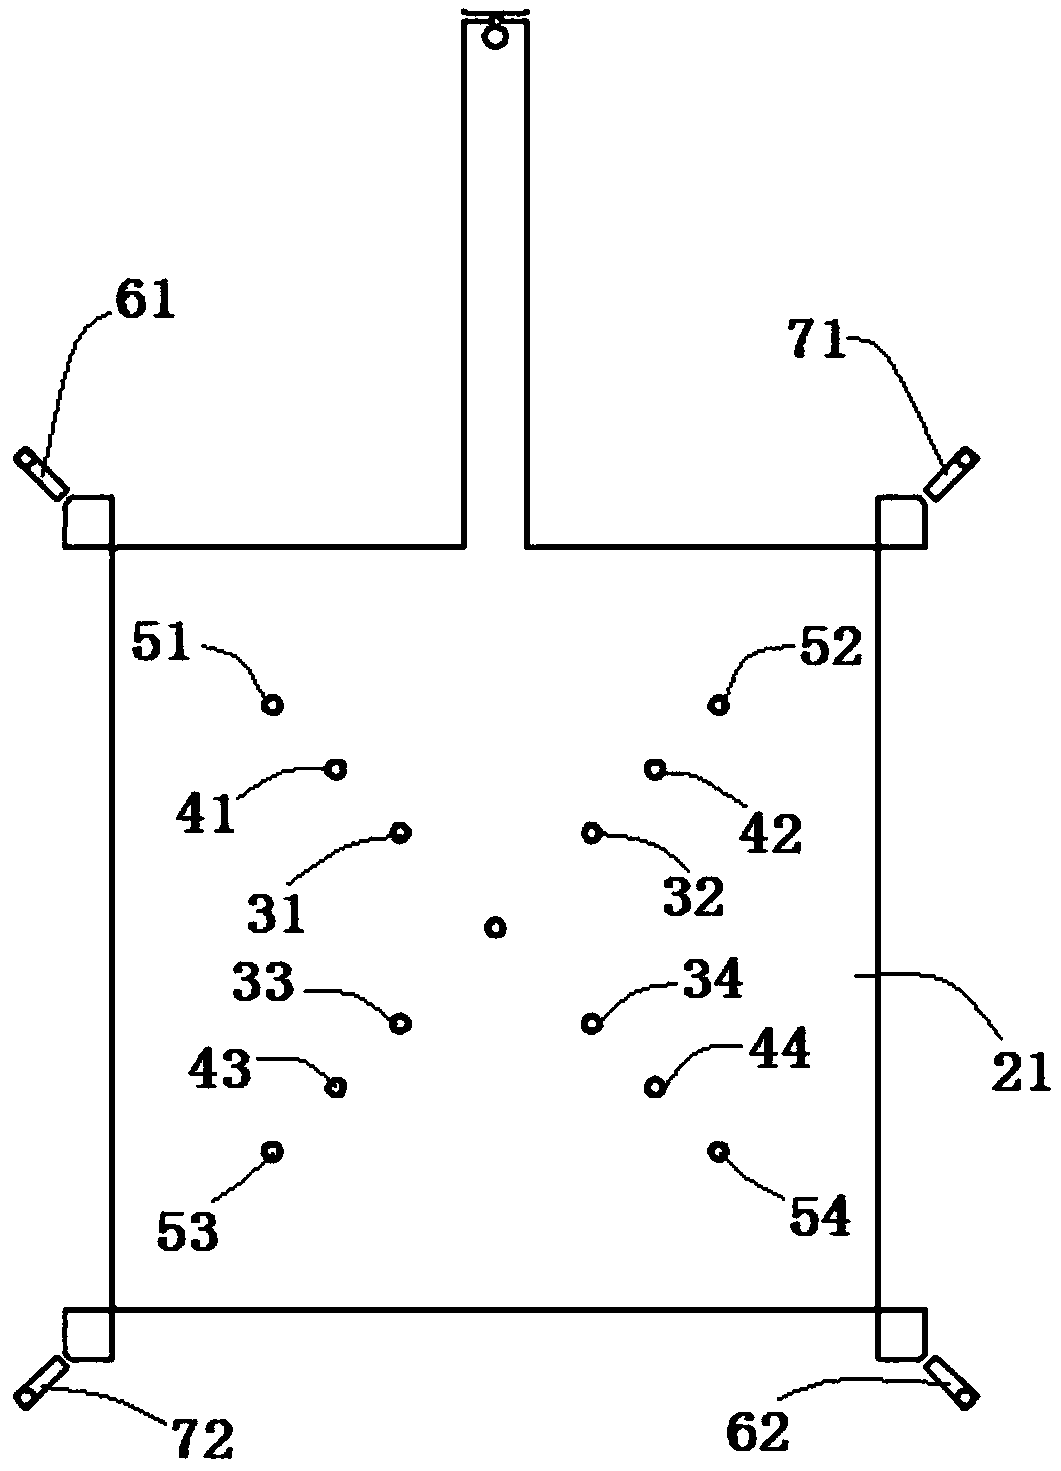 Frequency polarization reconfigurable patch antenna